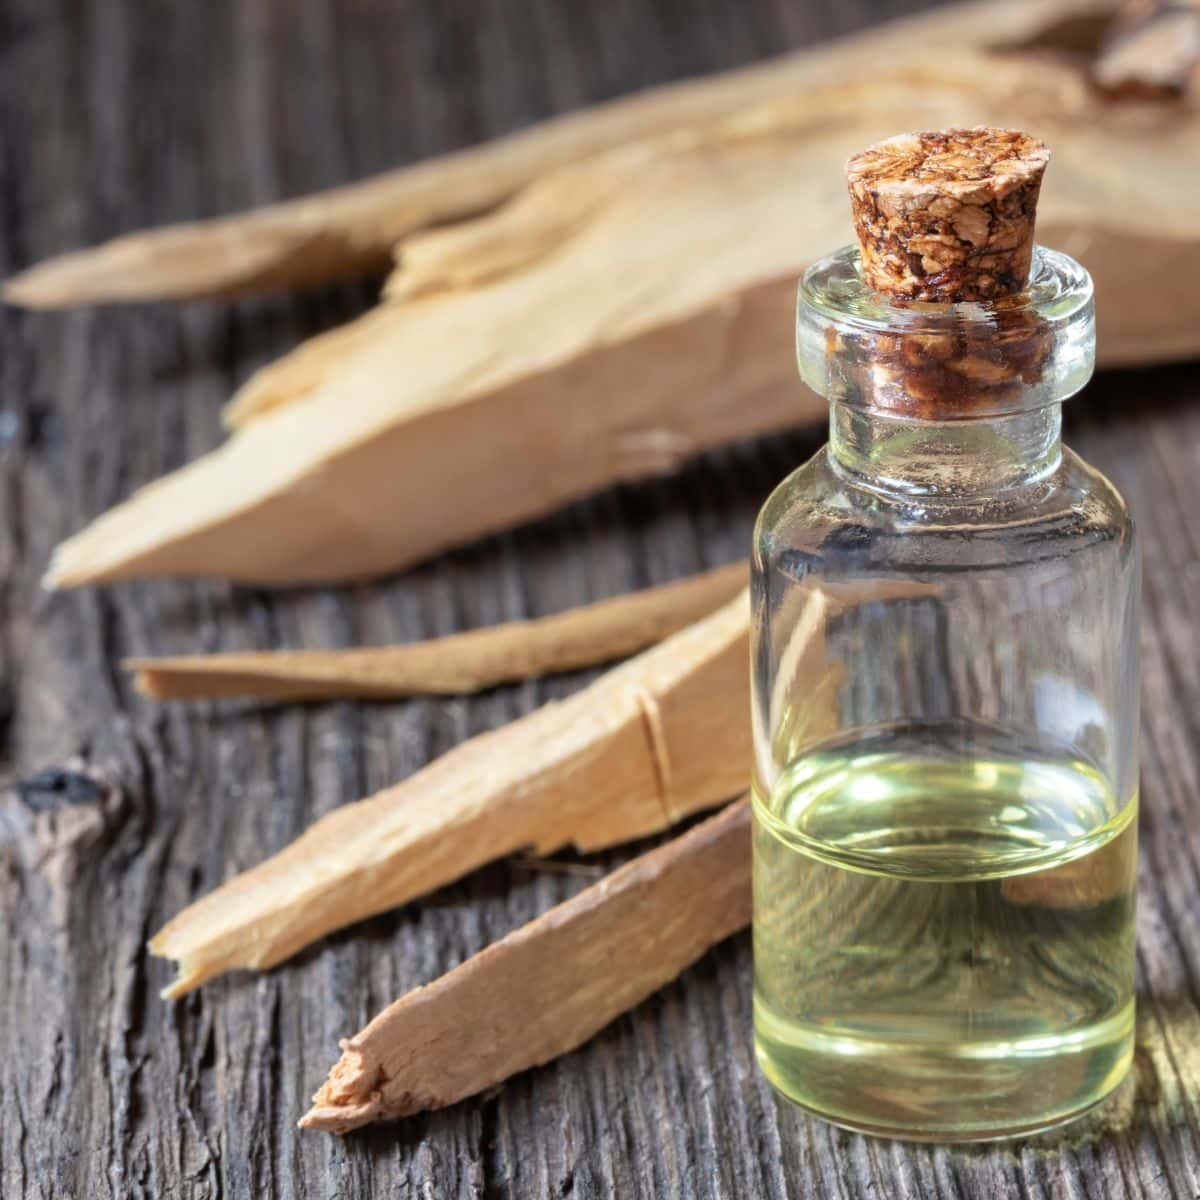 What is the spiritual meaning of smelling sandalwood